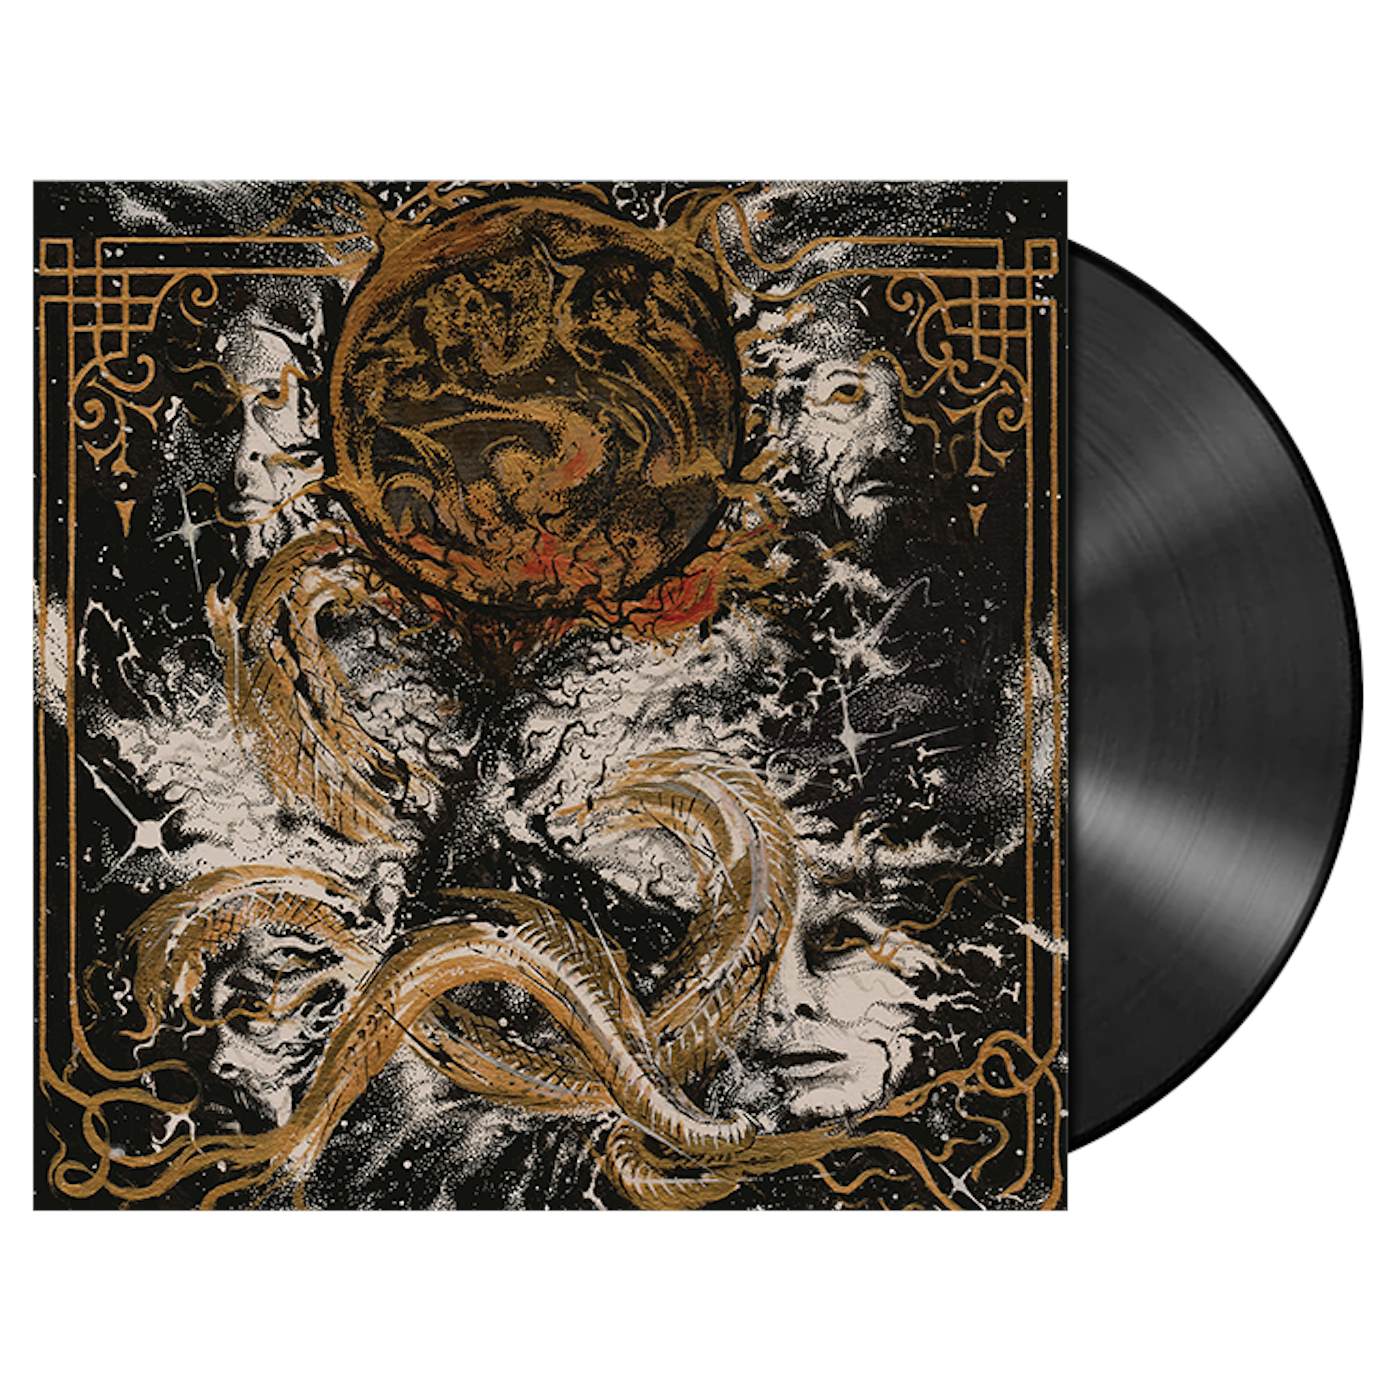 KING WOMAN - 'Created In The Image Of Suffering' LP (Vinyl)